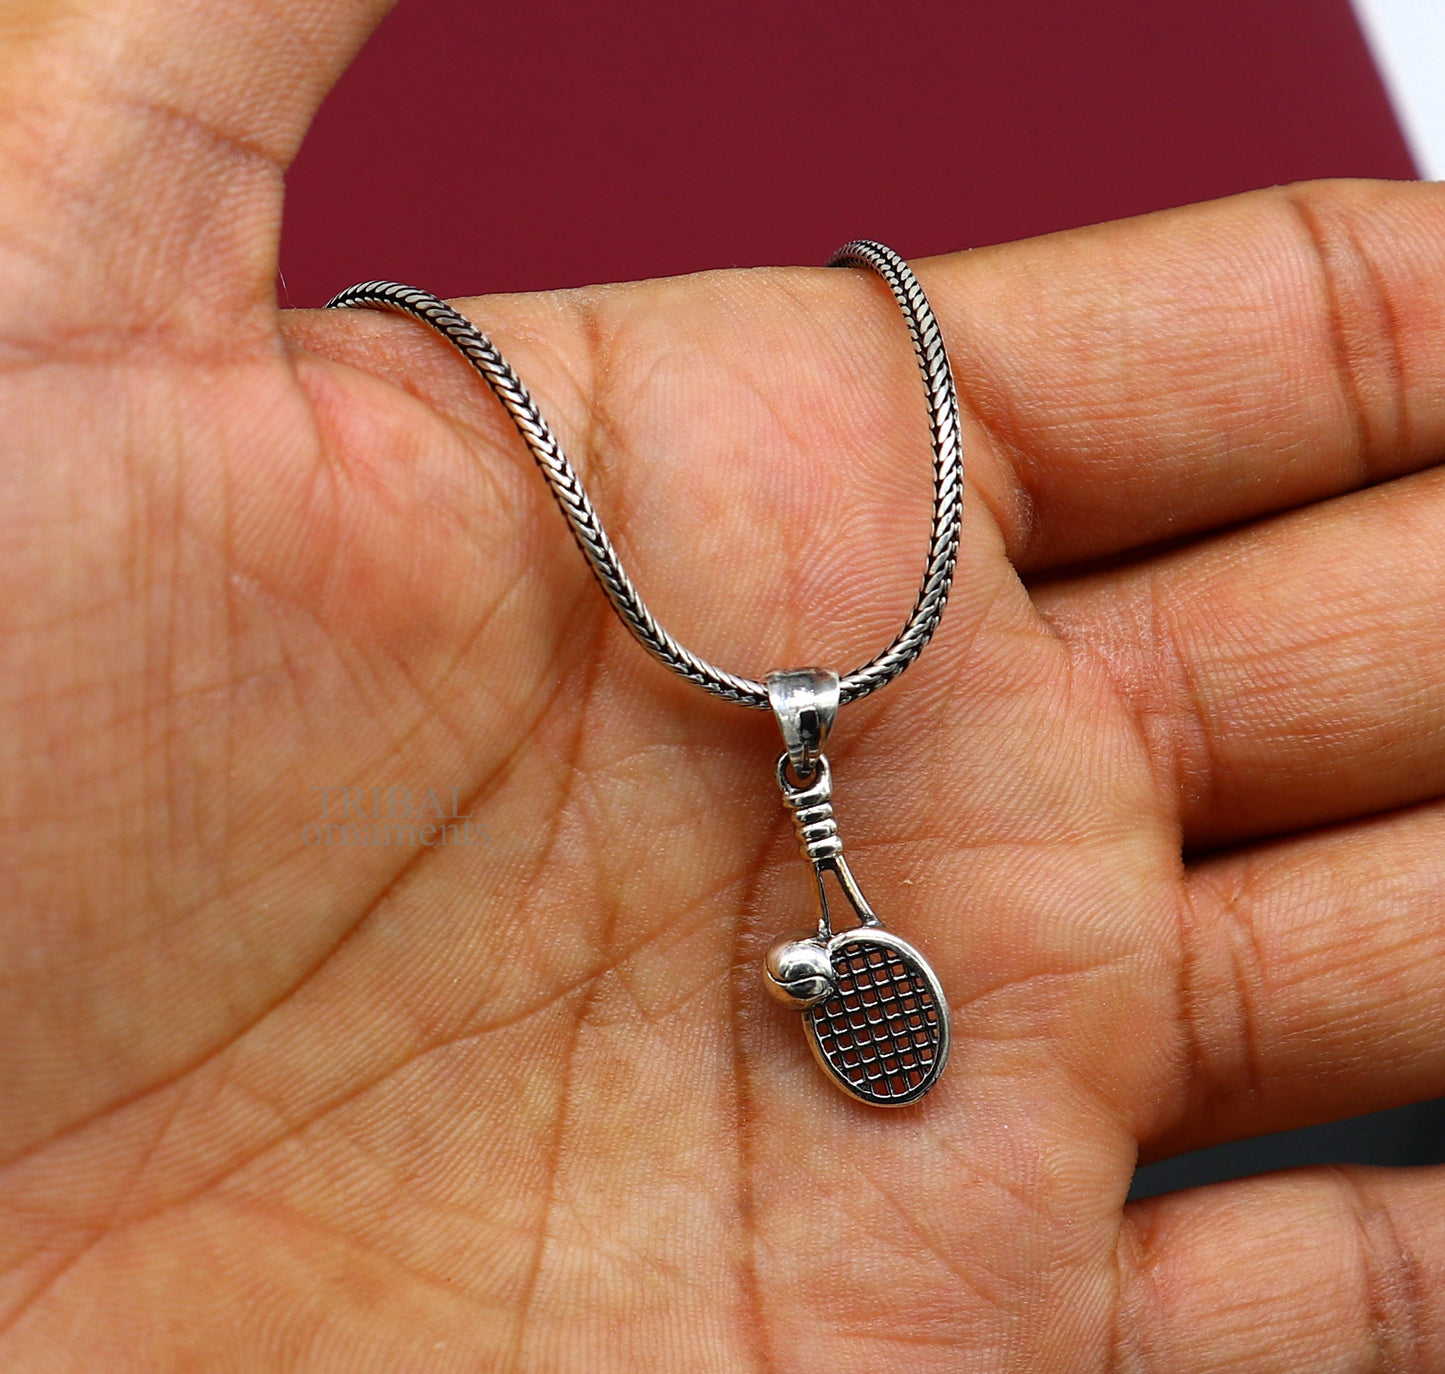 925 sterling silver handmade stylish design small Tennis racket style pendant best gifting jewelry religious pendant custom jewelry ssp1689 - TRIBAL ORNAMENTS